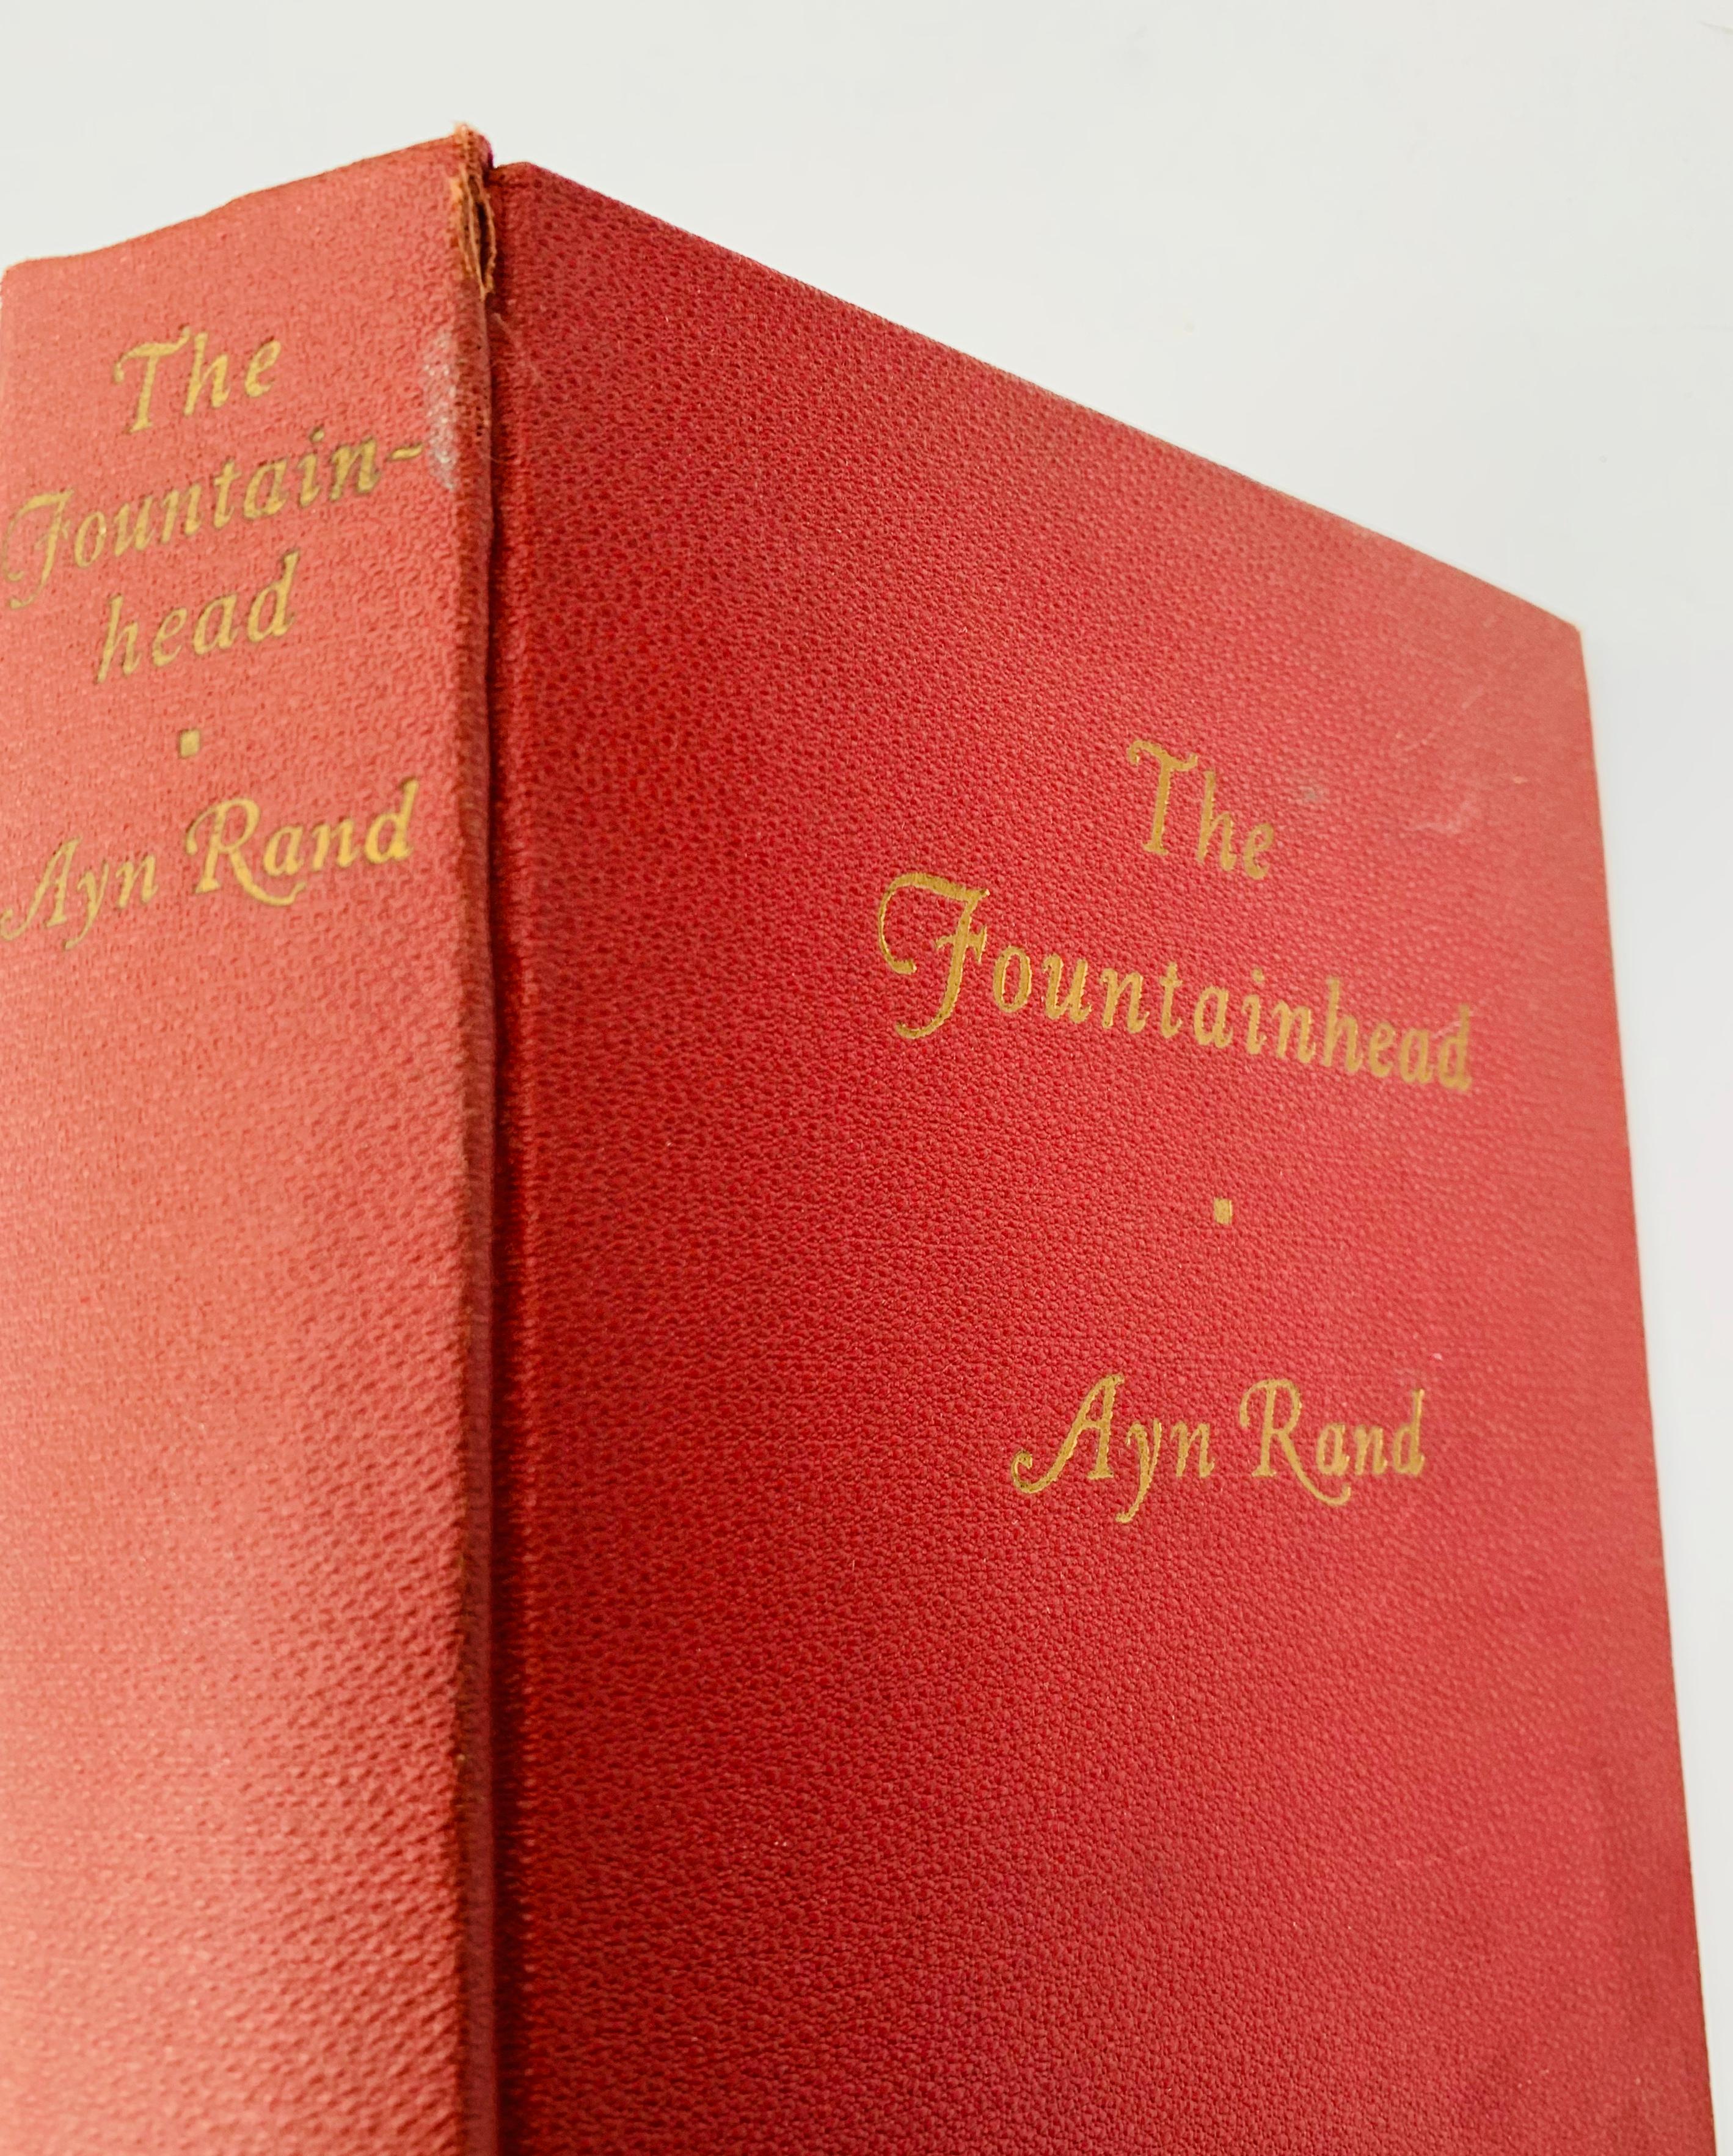 The Fountainhead by AYN RAND (1943) Early Printing